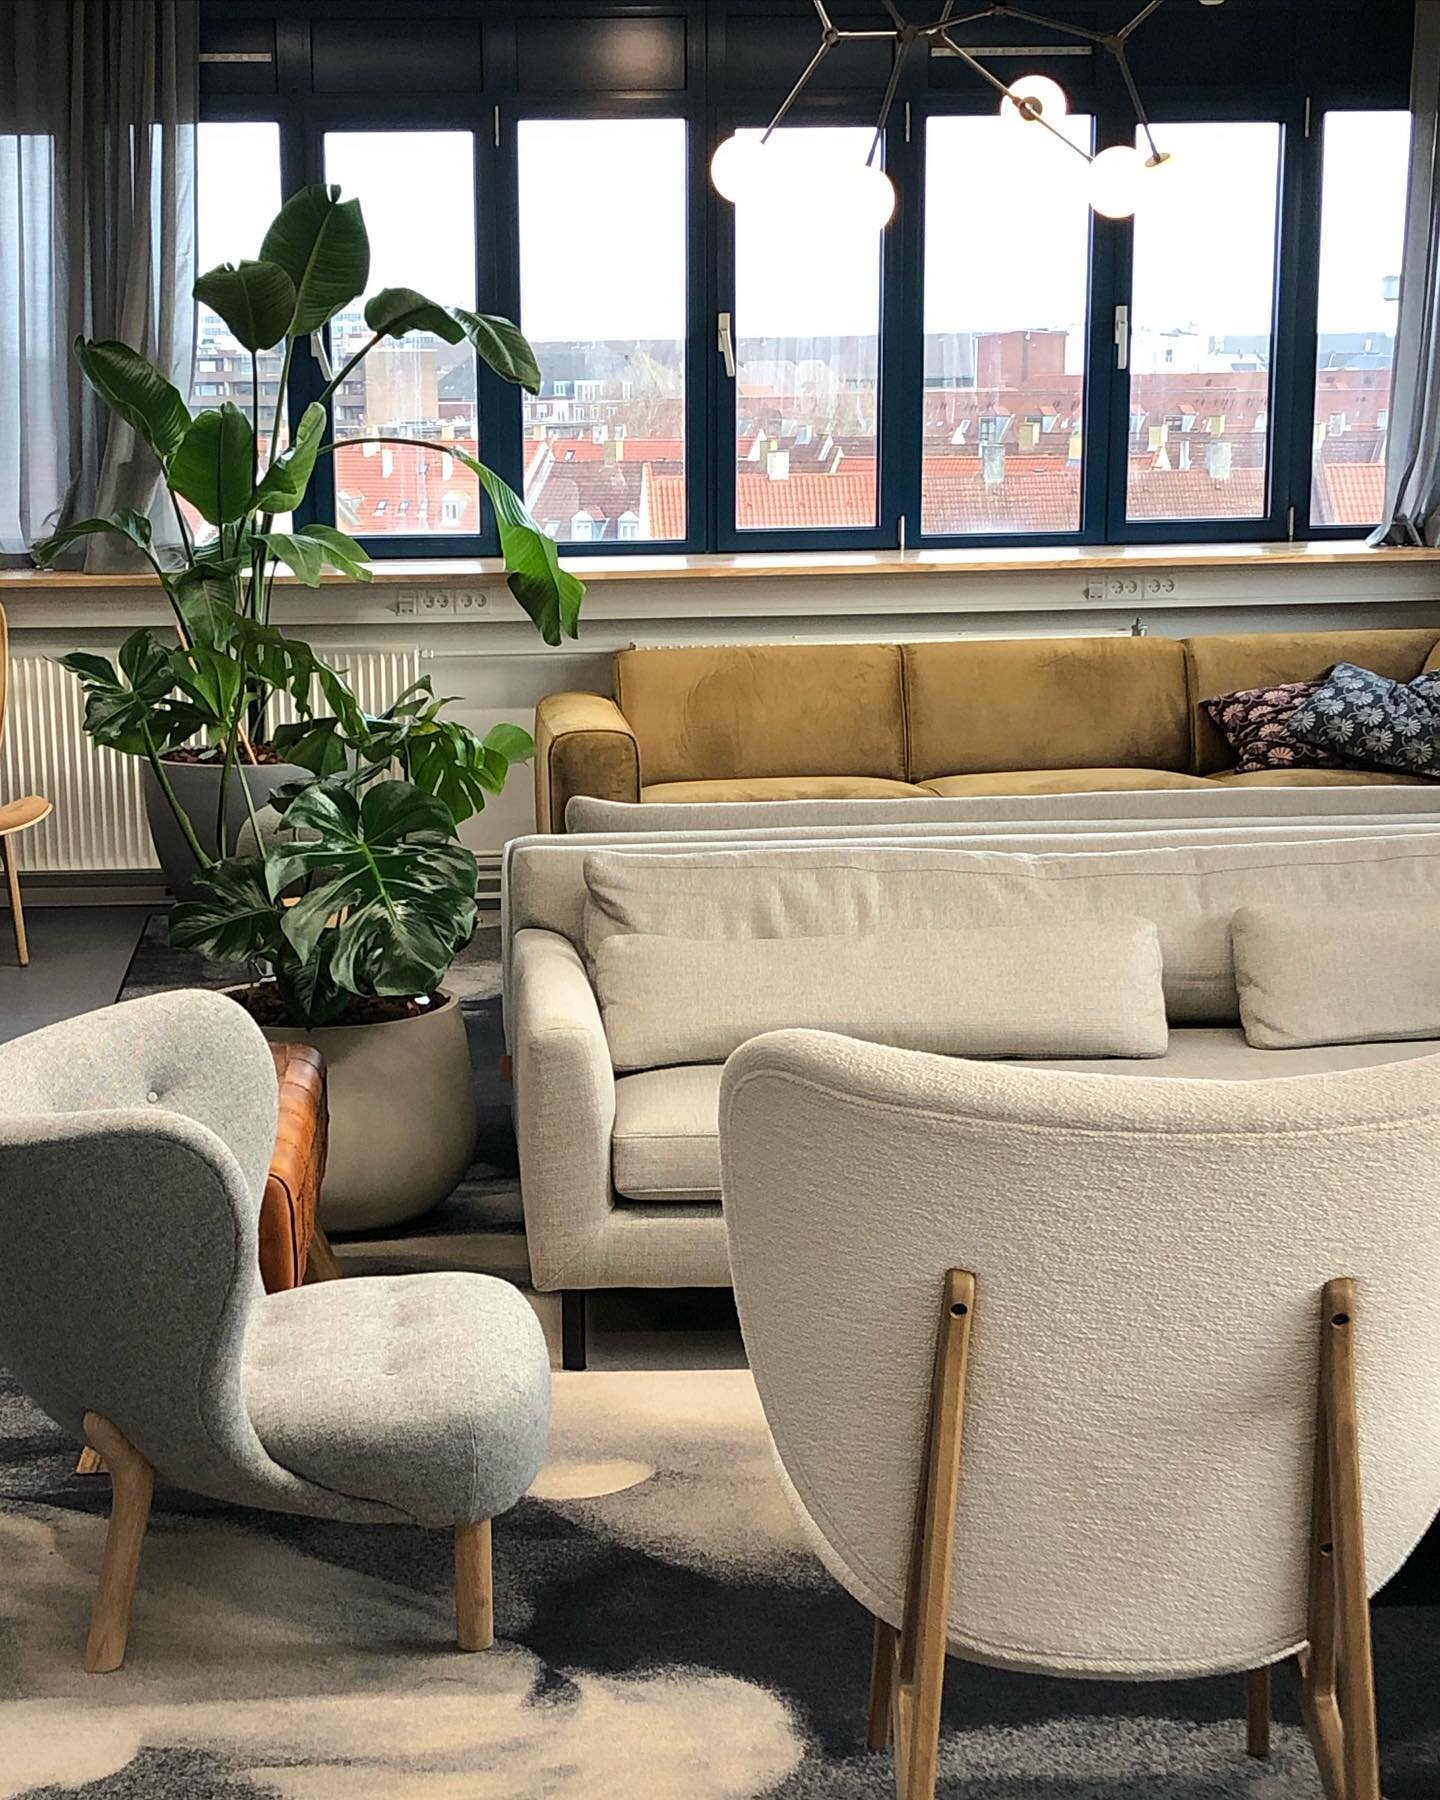 #carpetday full Project for amazing client finishing today - remote as we are in isolation 🦠😷 we got to build one of the most laid back office spaces yet / with hanging chairs / lounges and bespoke furniture to match the New York vibe in the huge b